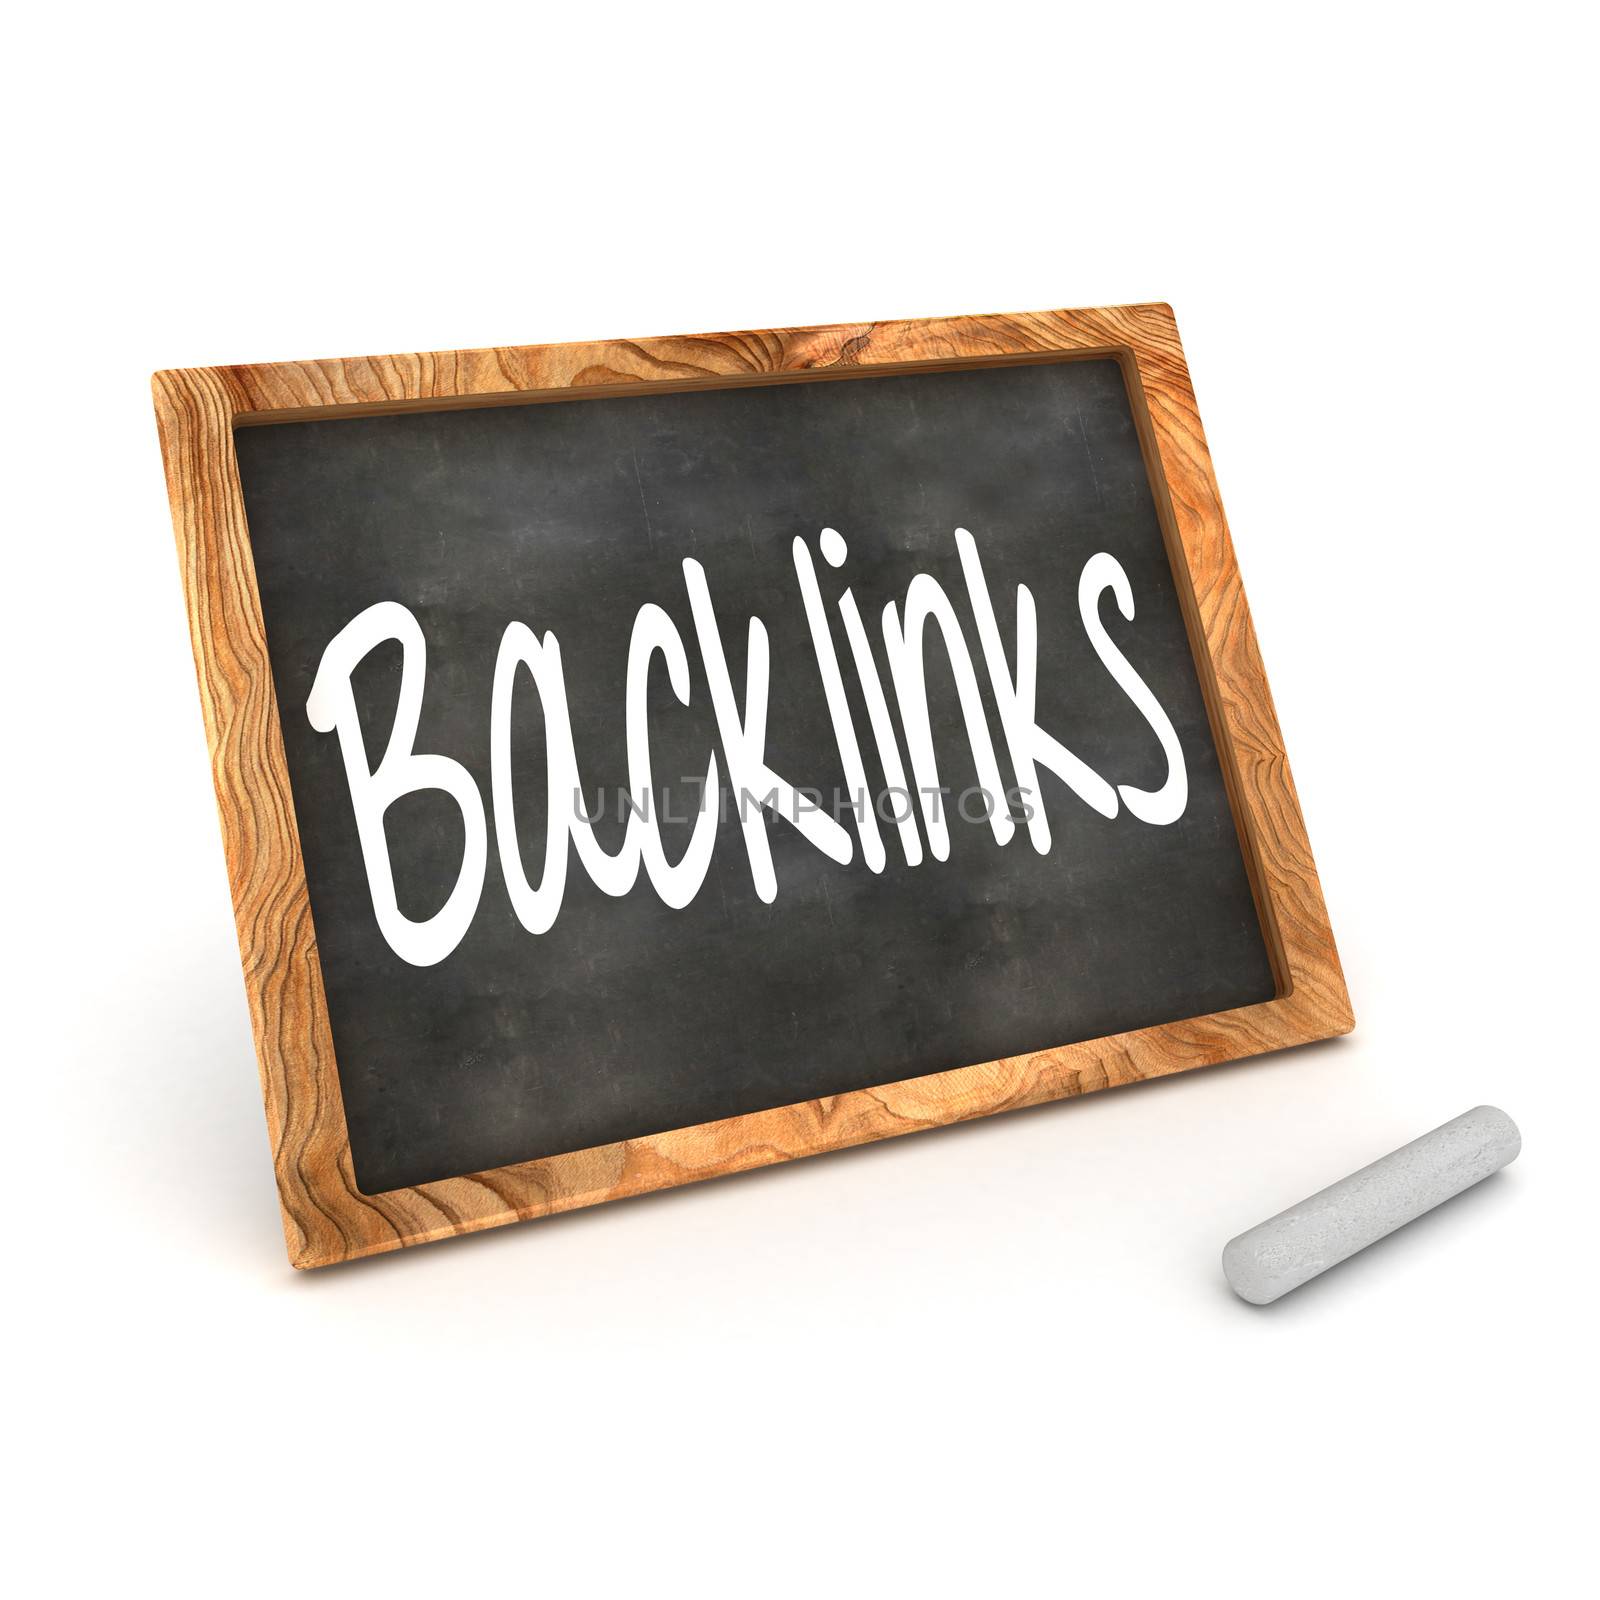 A Colourful 3d Rendered Concept Illustration showing "Backlinks" writen on a Blackboard with white chalk